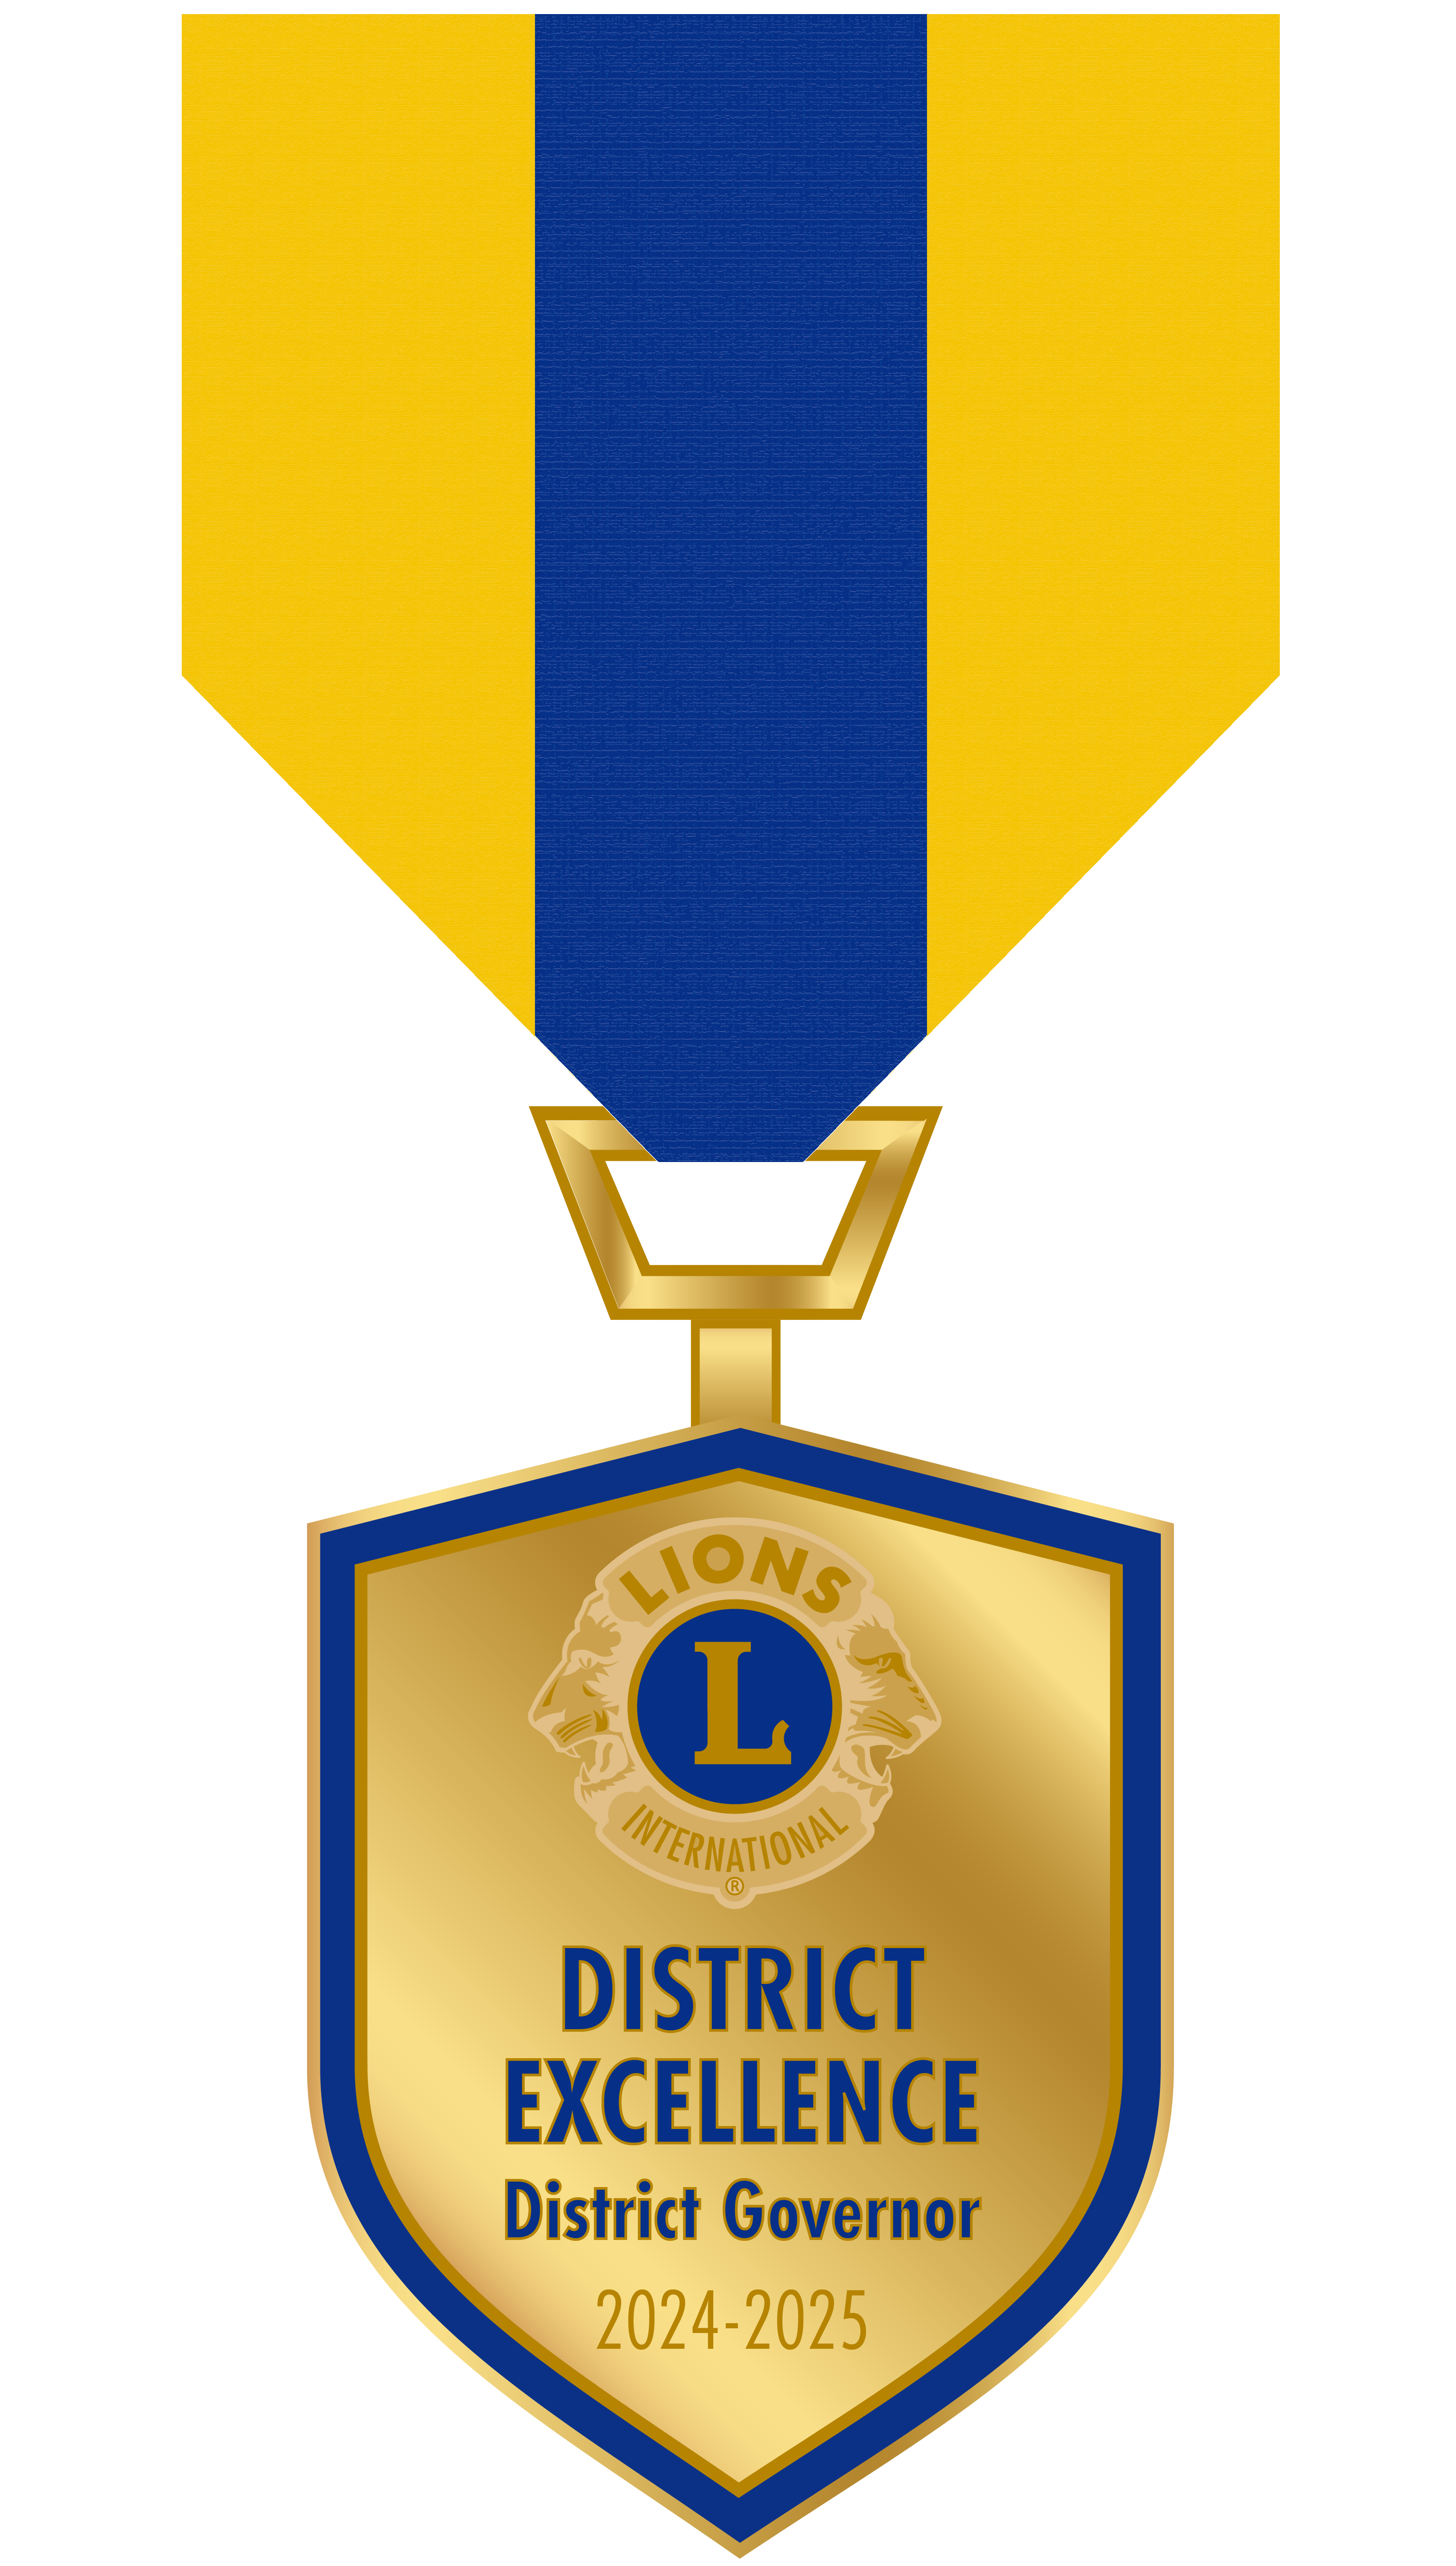 District Excellence Award Medal